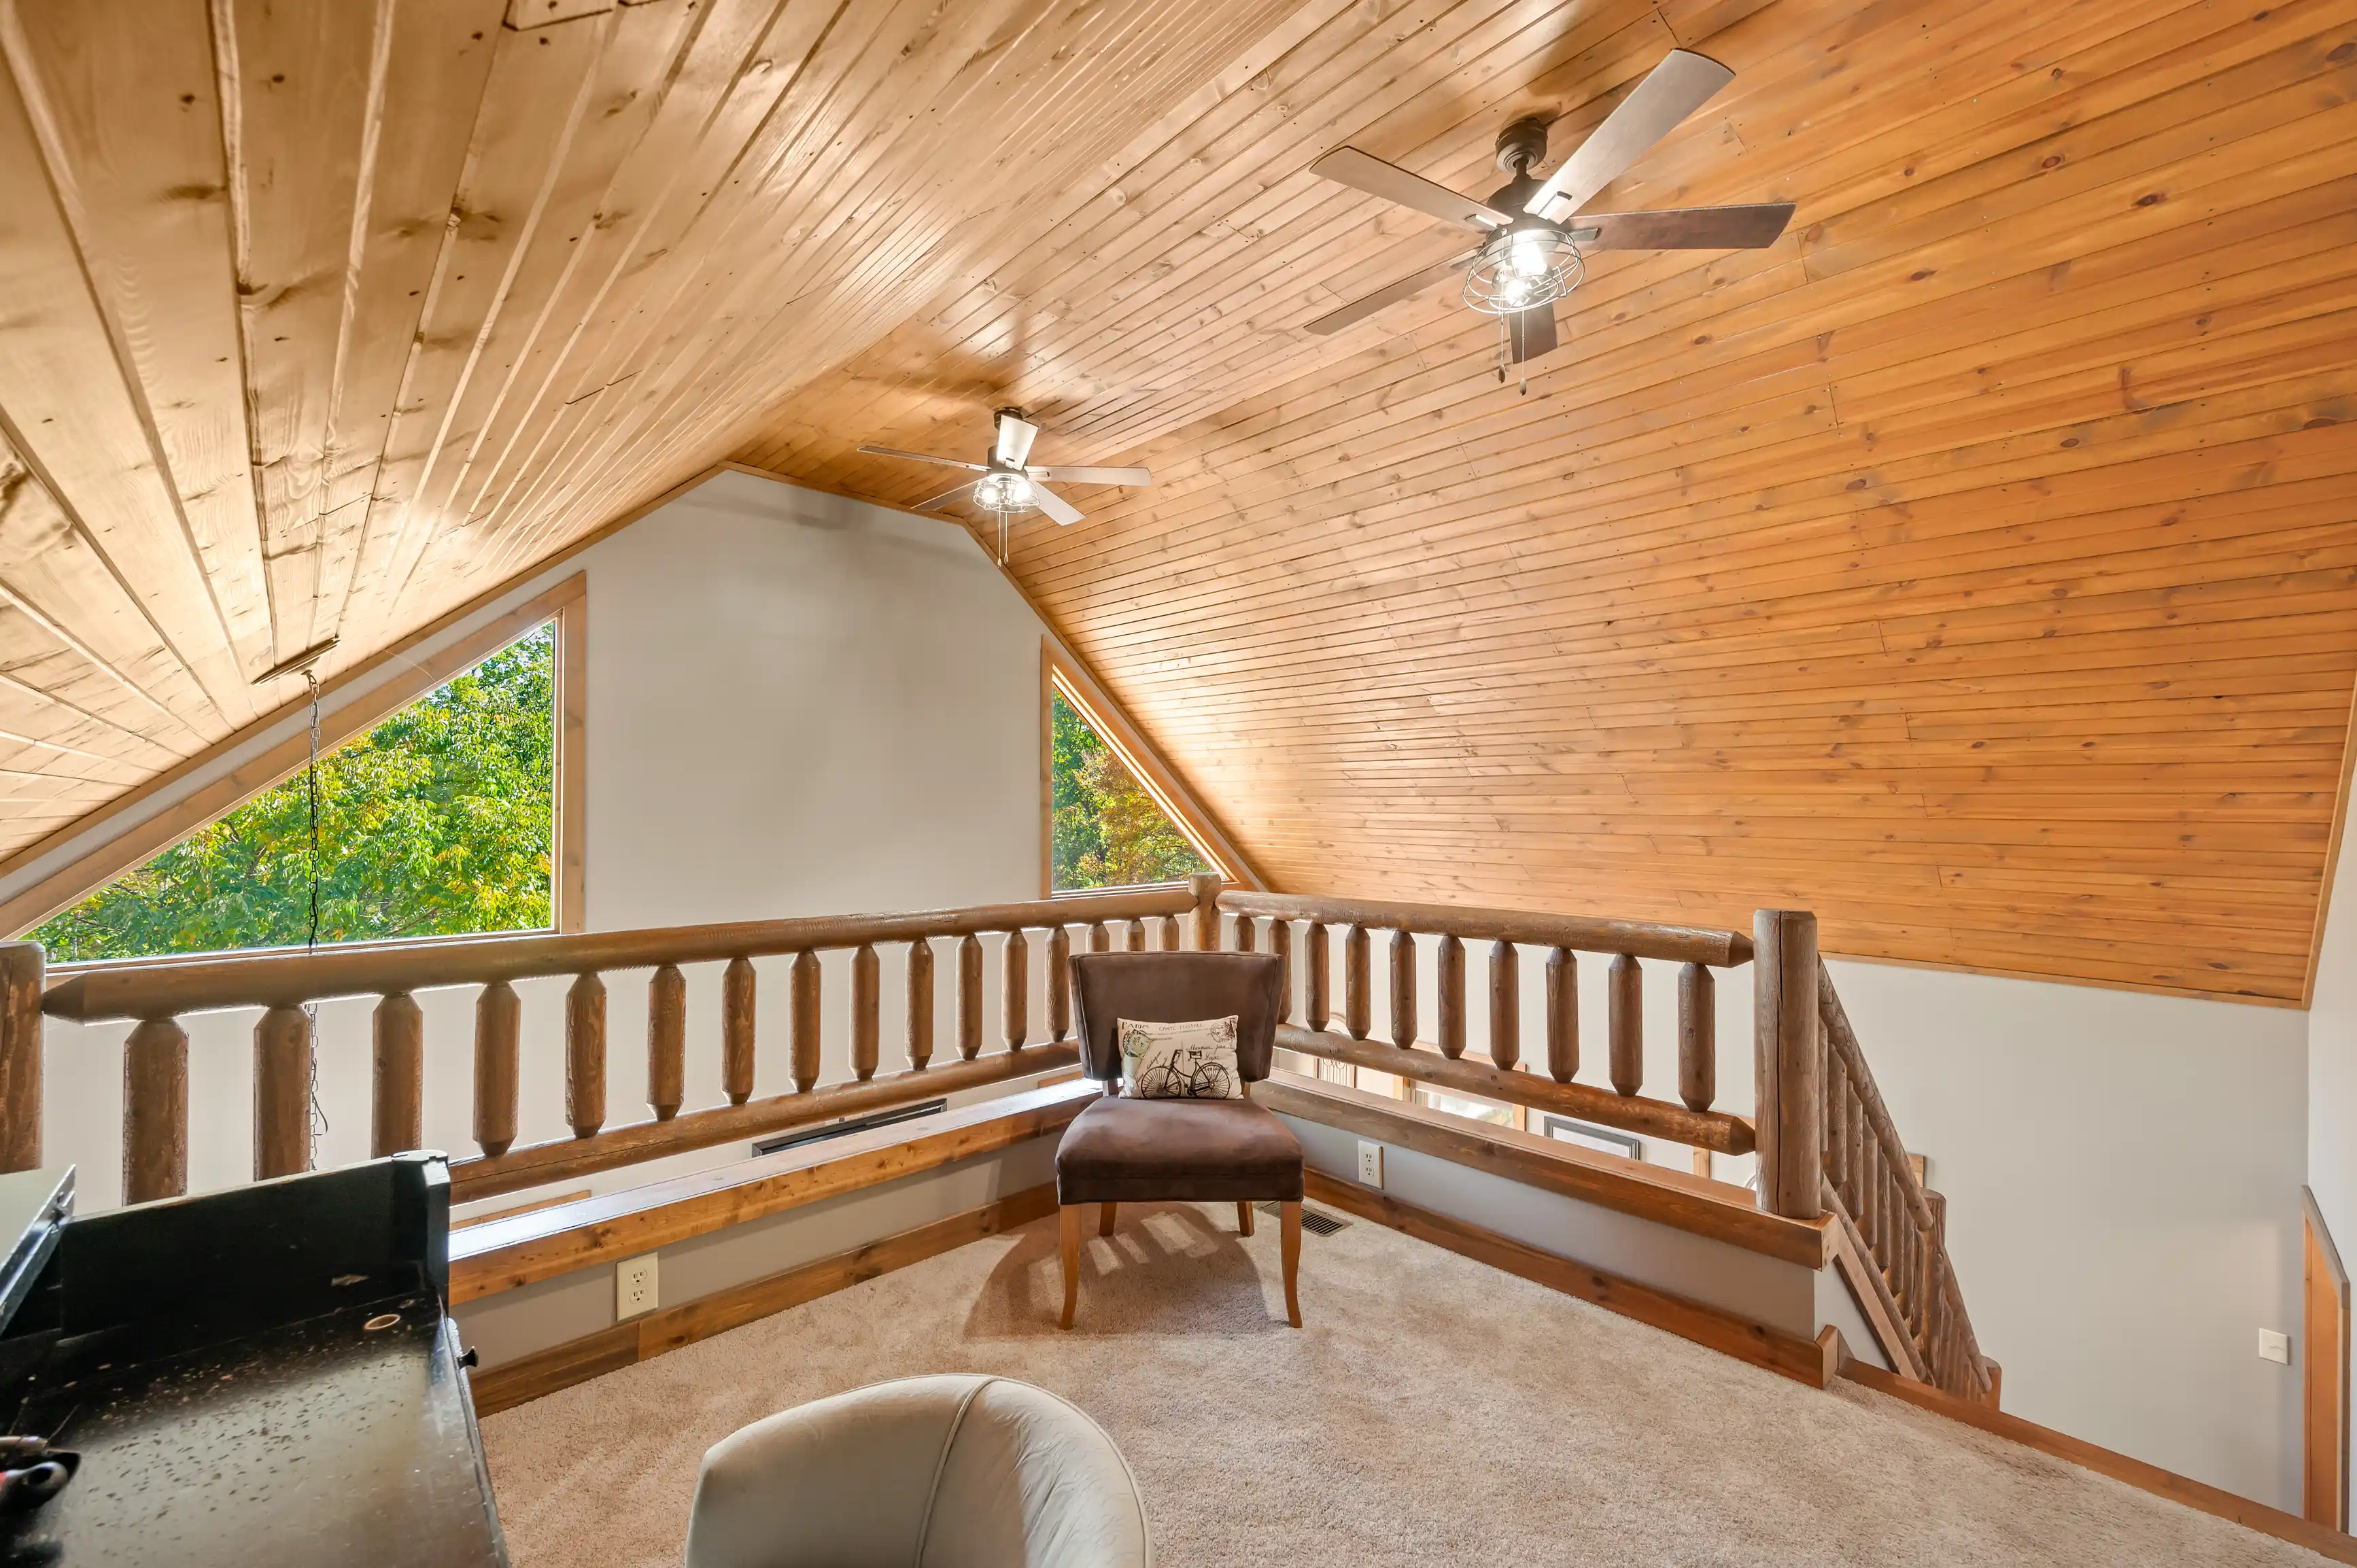 Cozy attic loft area with wooden ceiling and flooring, furnished with a brown armchair, featuring large windows with a view of greenery, and two ceiling fans.